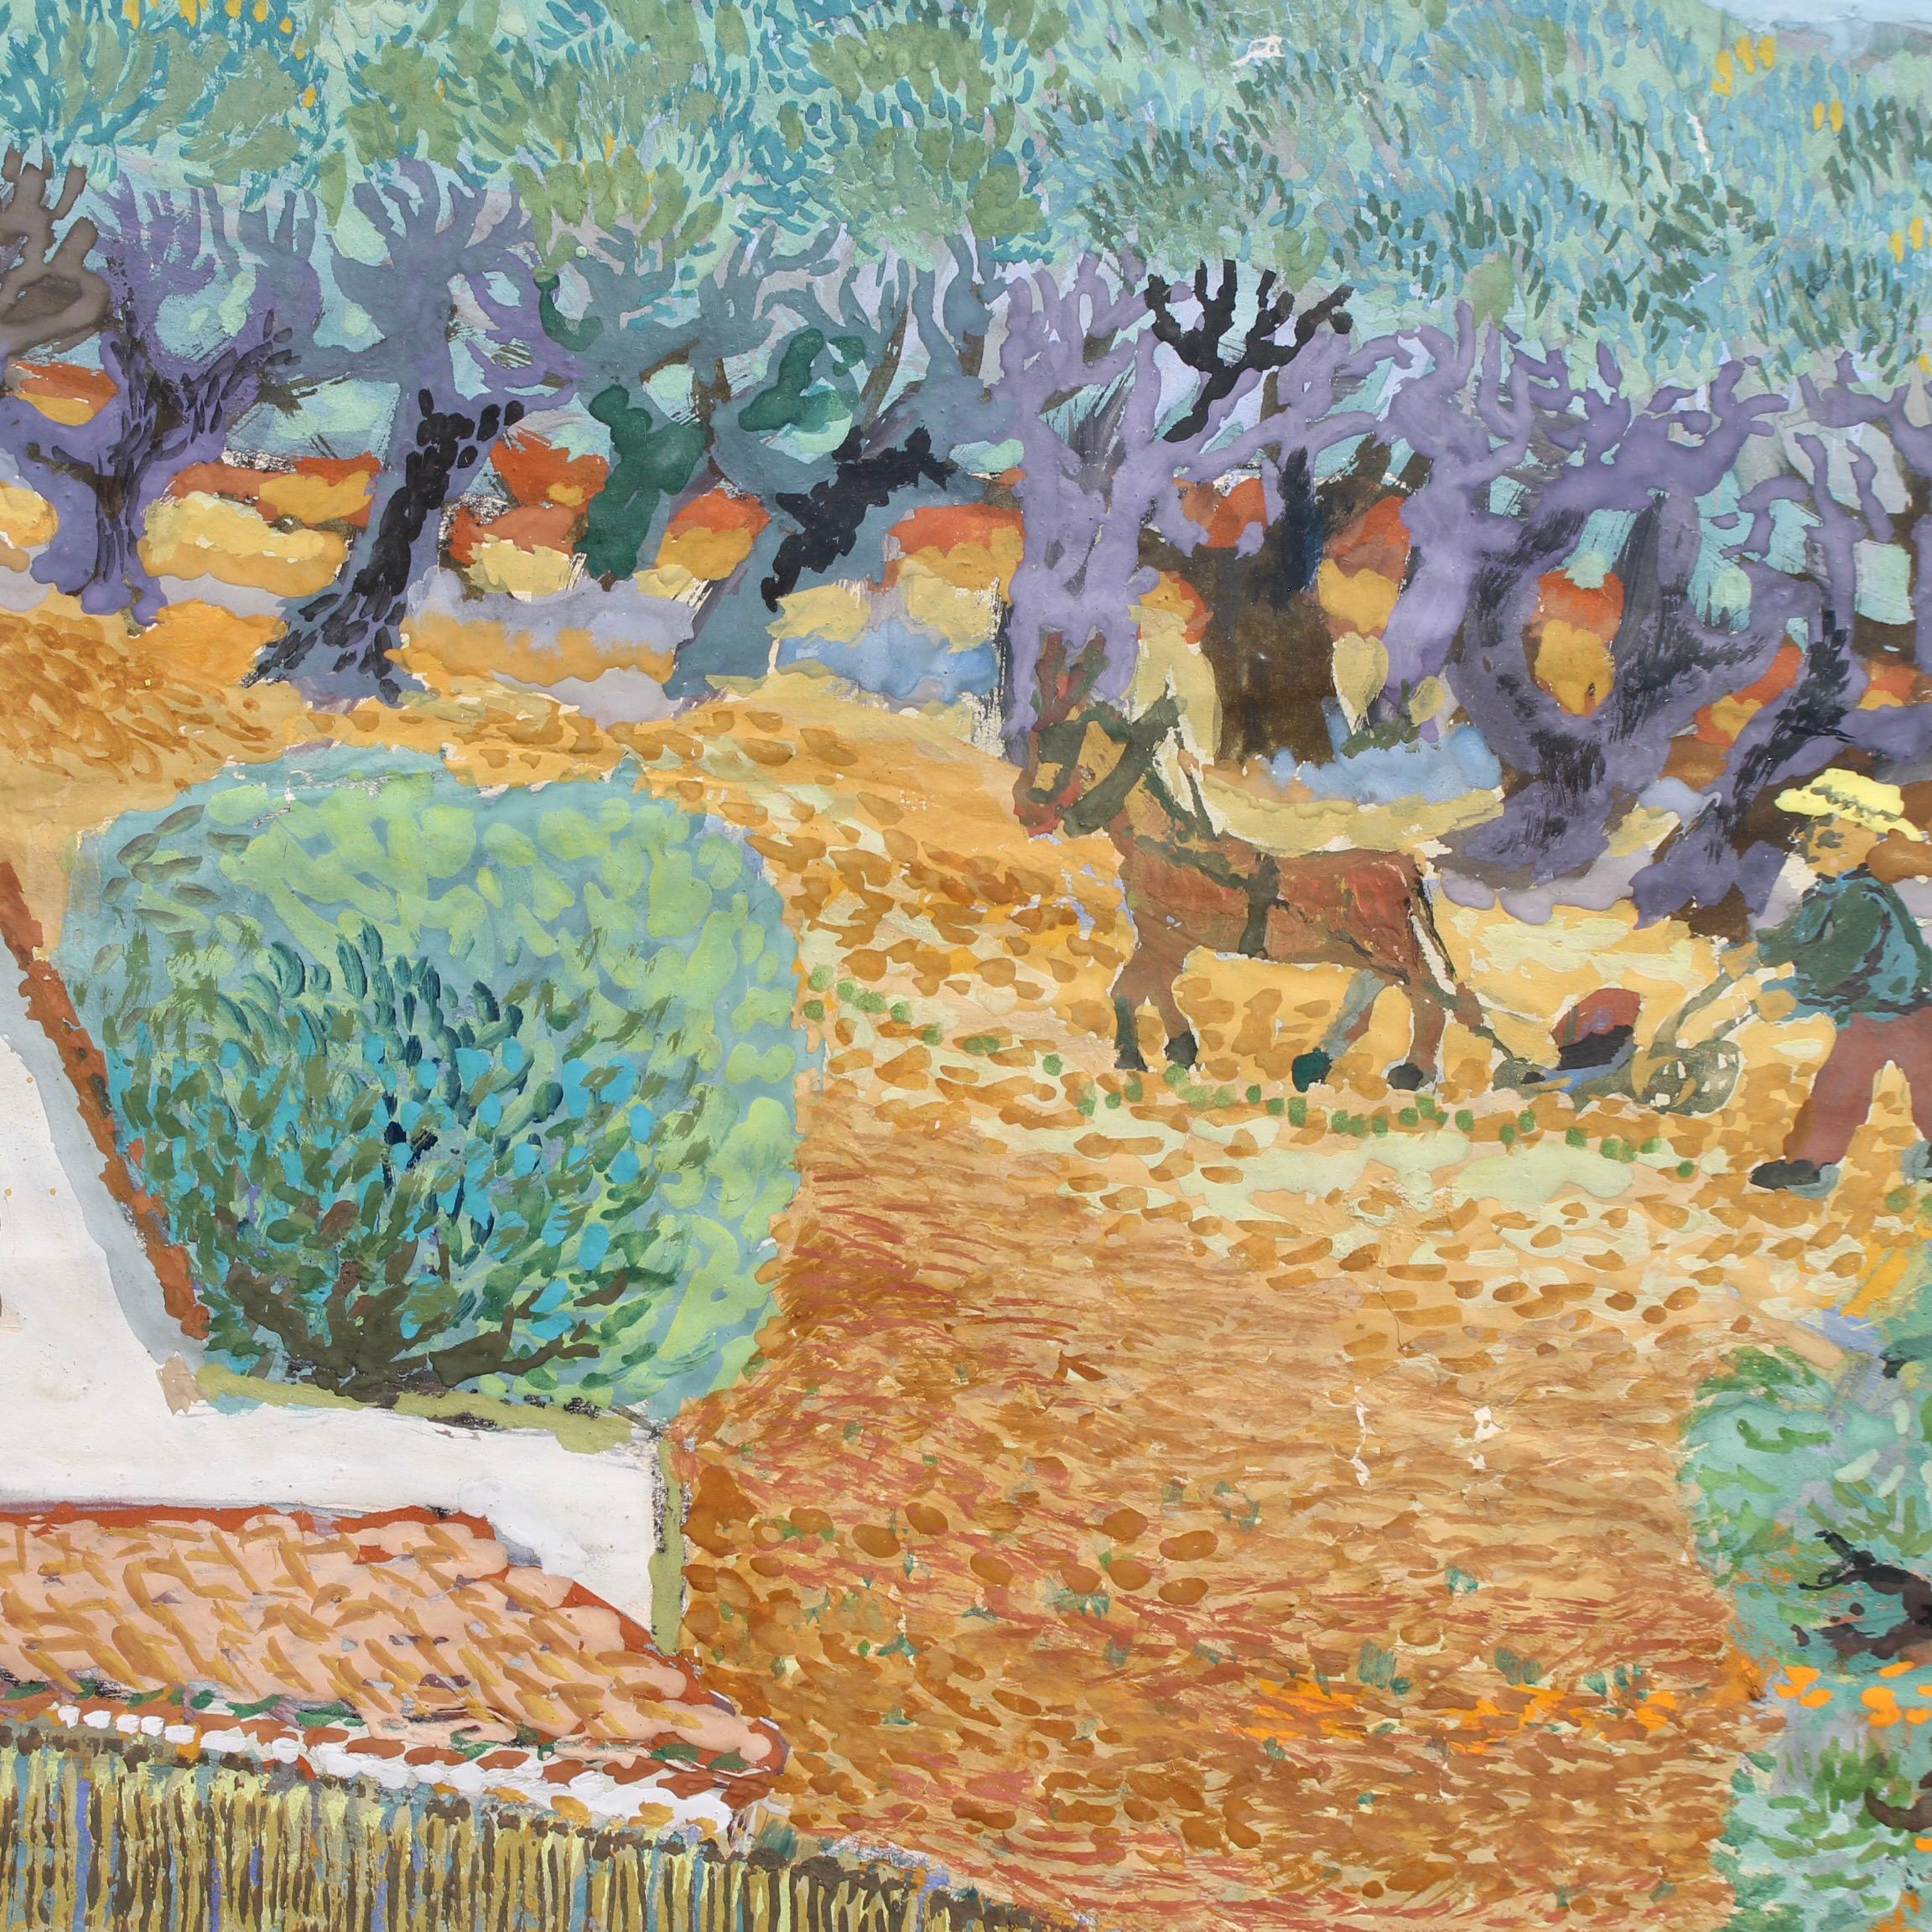 'Family Farm in France', gouache on art paper, by Michel Debiève (circa 1970s). An extremely endearing depiction of a French family farm, the delight is in the detail the artist has rendered. The viewer may look at it over and over and simply be